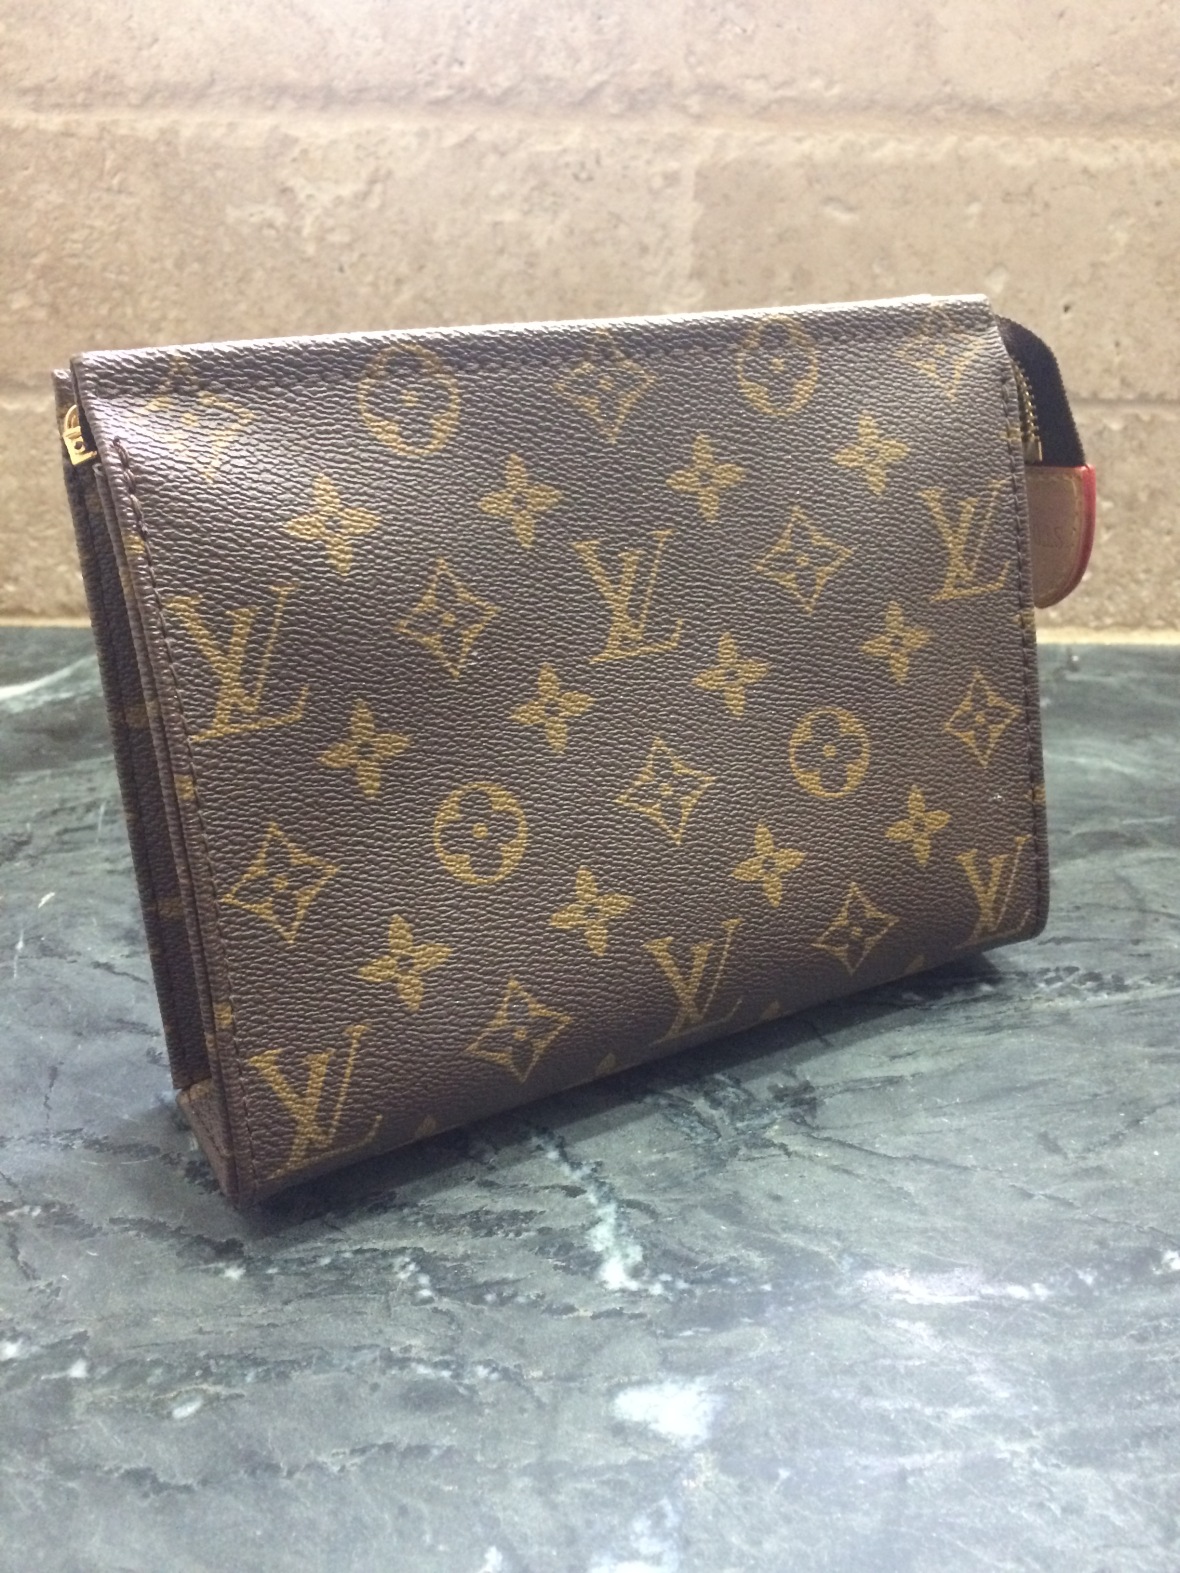 LOUIS VUITTON LIMITED EDITION MONOGRAM TOILETRY POUCH